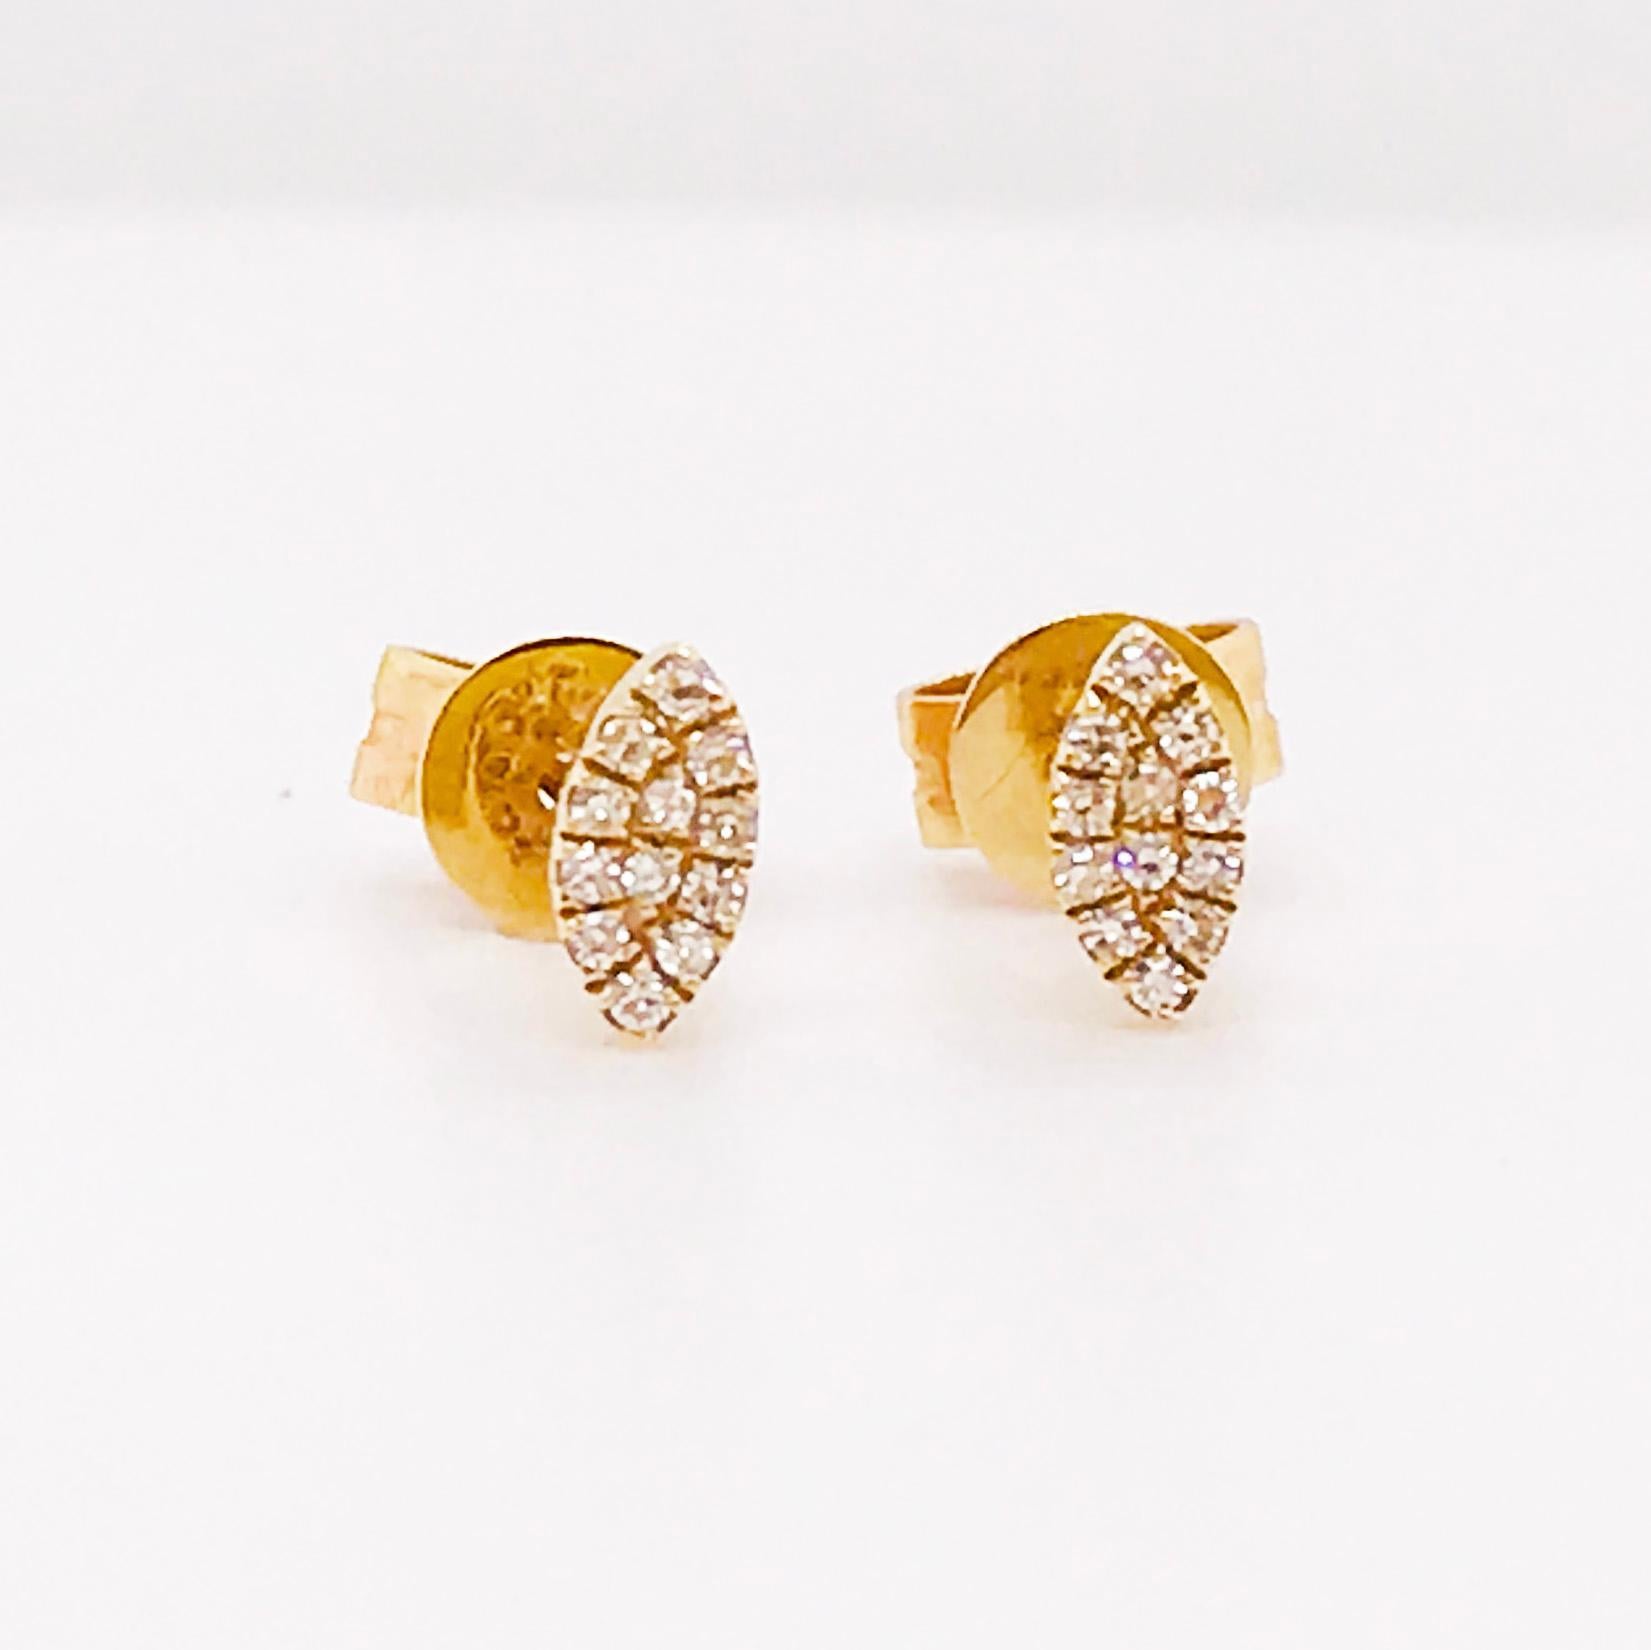 Pave Diamond Marquise Shaped Earring Studs. With 0.06 carat total diamond weight these marquise shaped earrings studs have round brilliant diamonds paving the top of each. These are the perfect dainty touch to your wardrobe. For a casual everyday